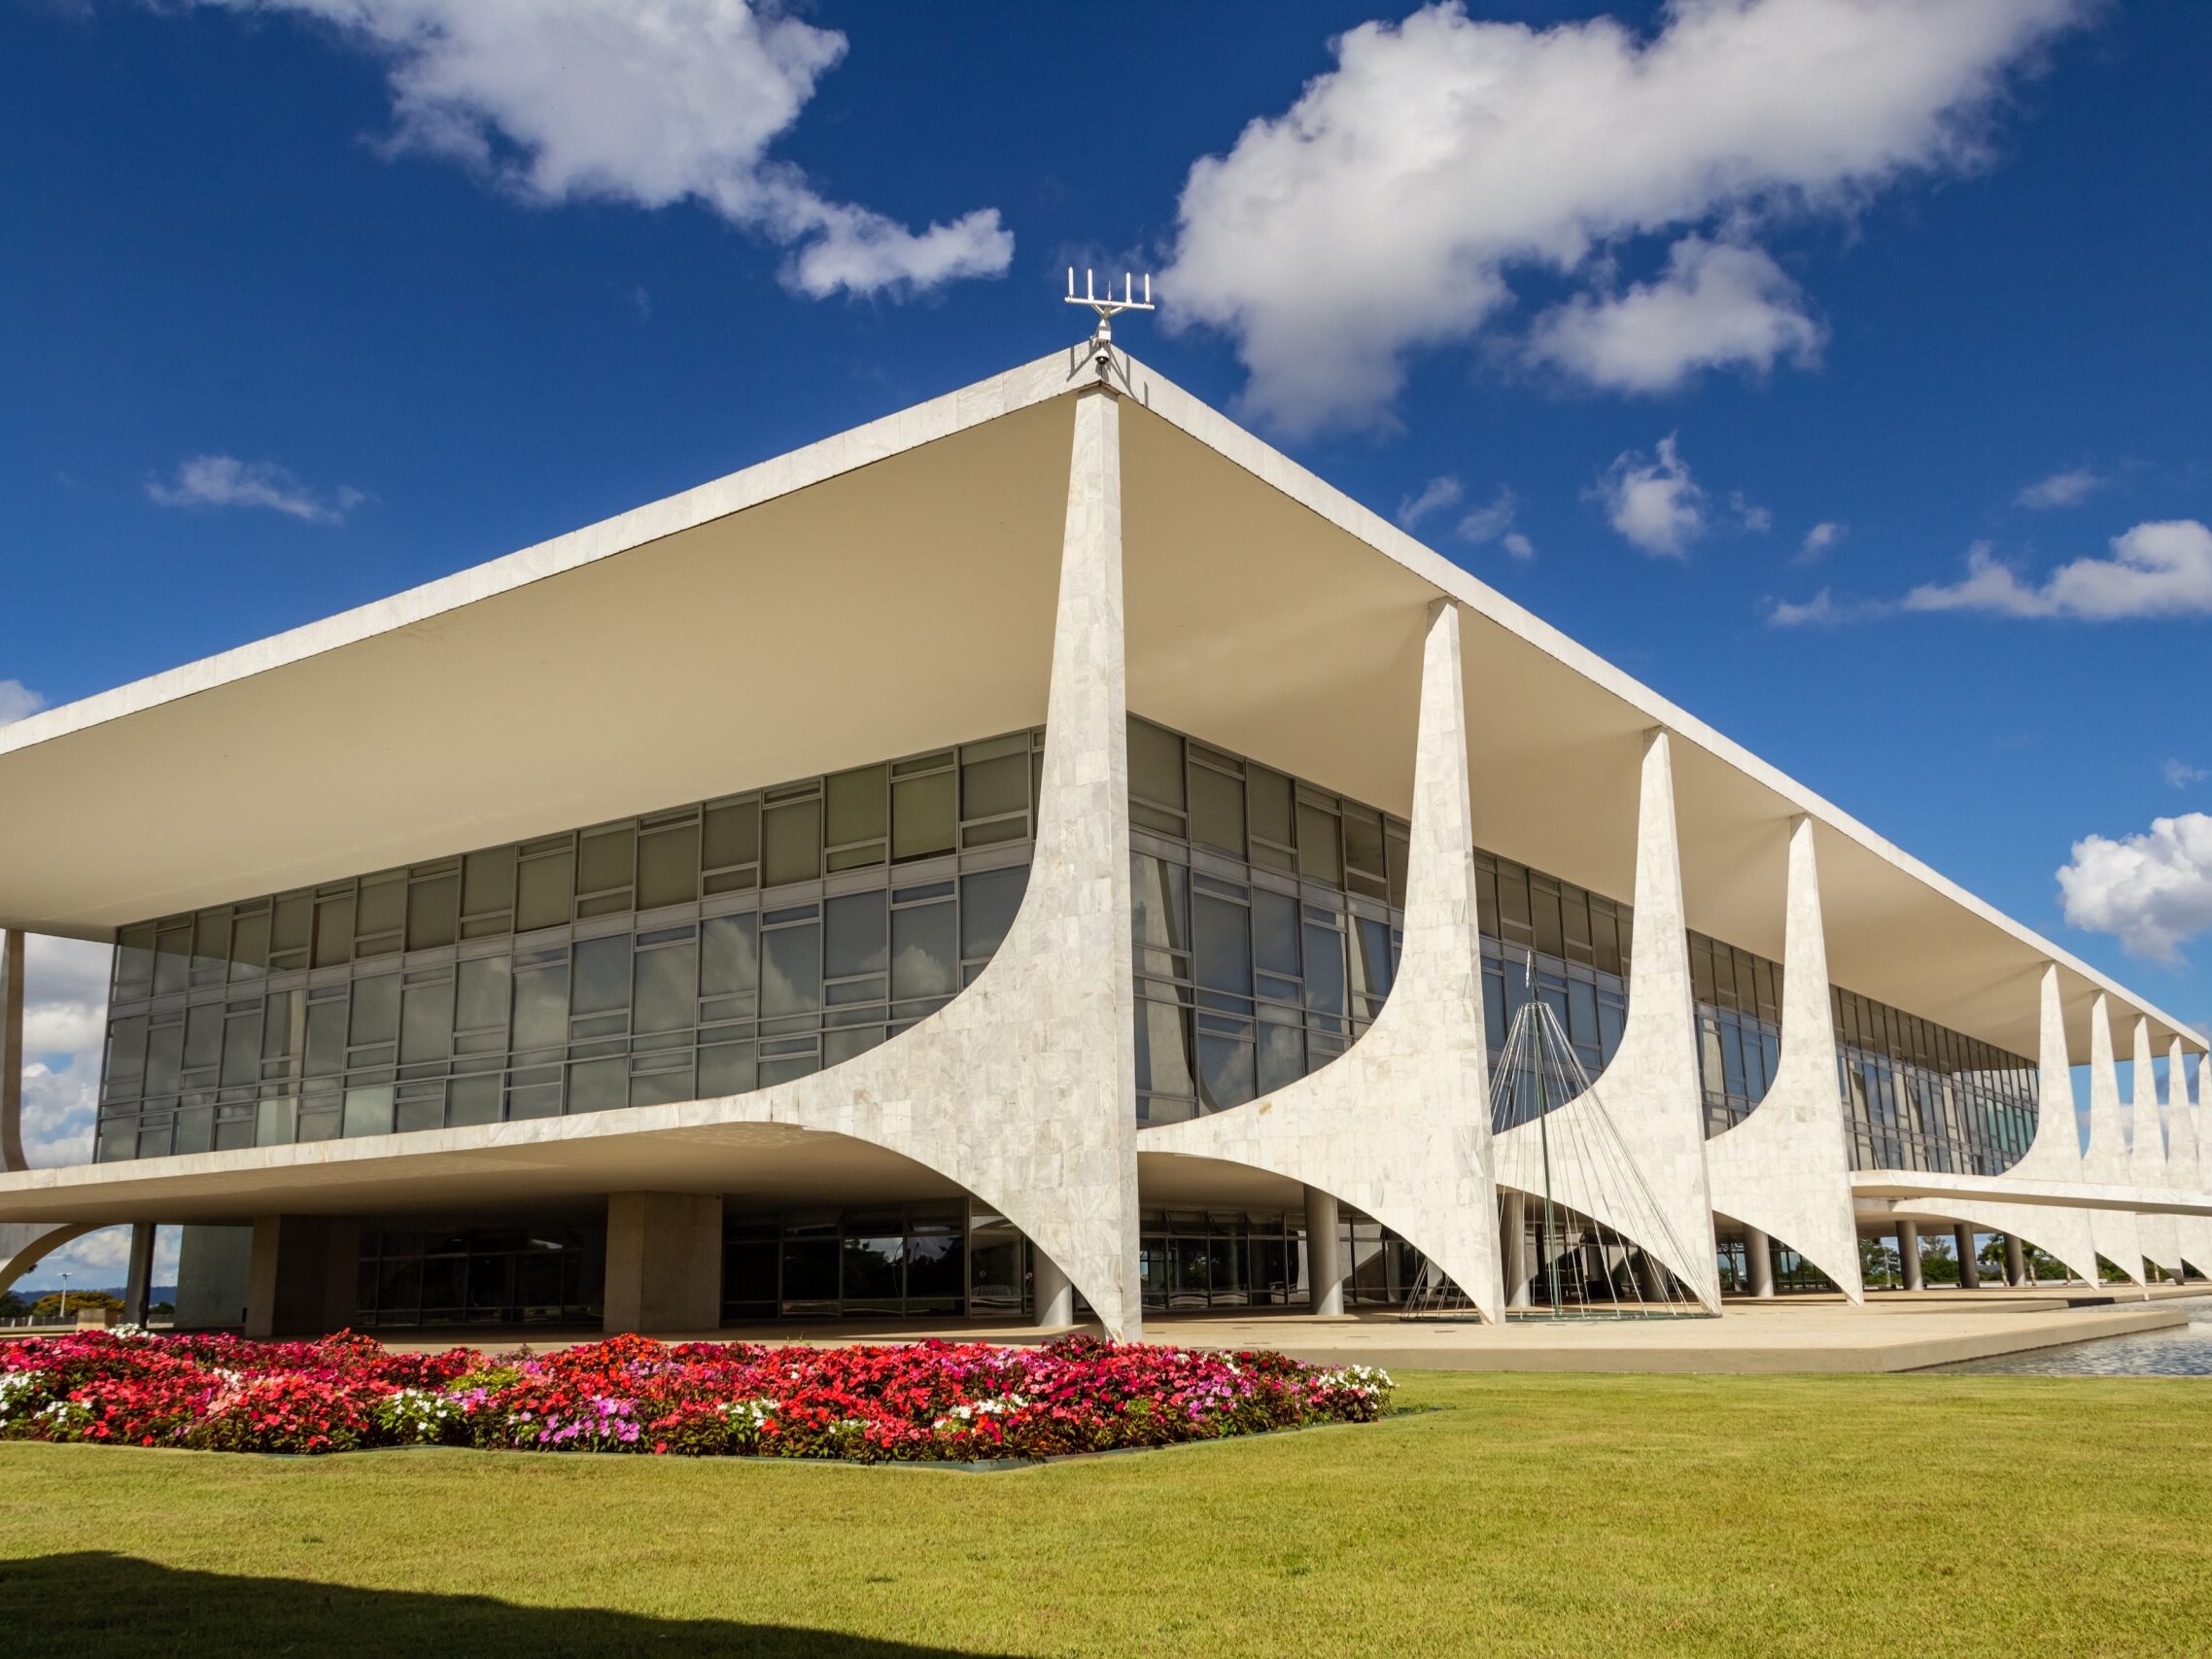 The Planalto Palace in Brasília - Brazil. This is where the Office of the President of the Republic is located.